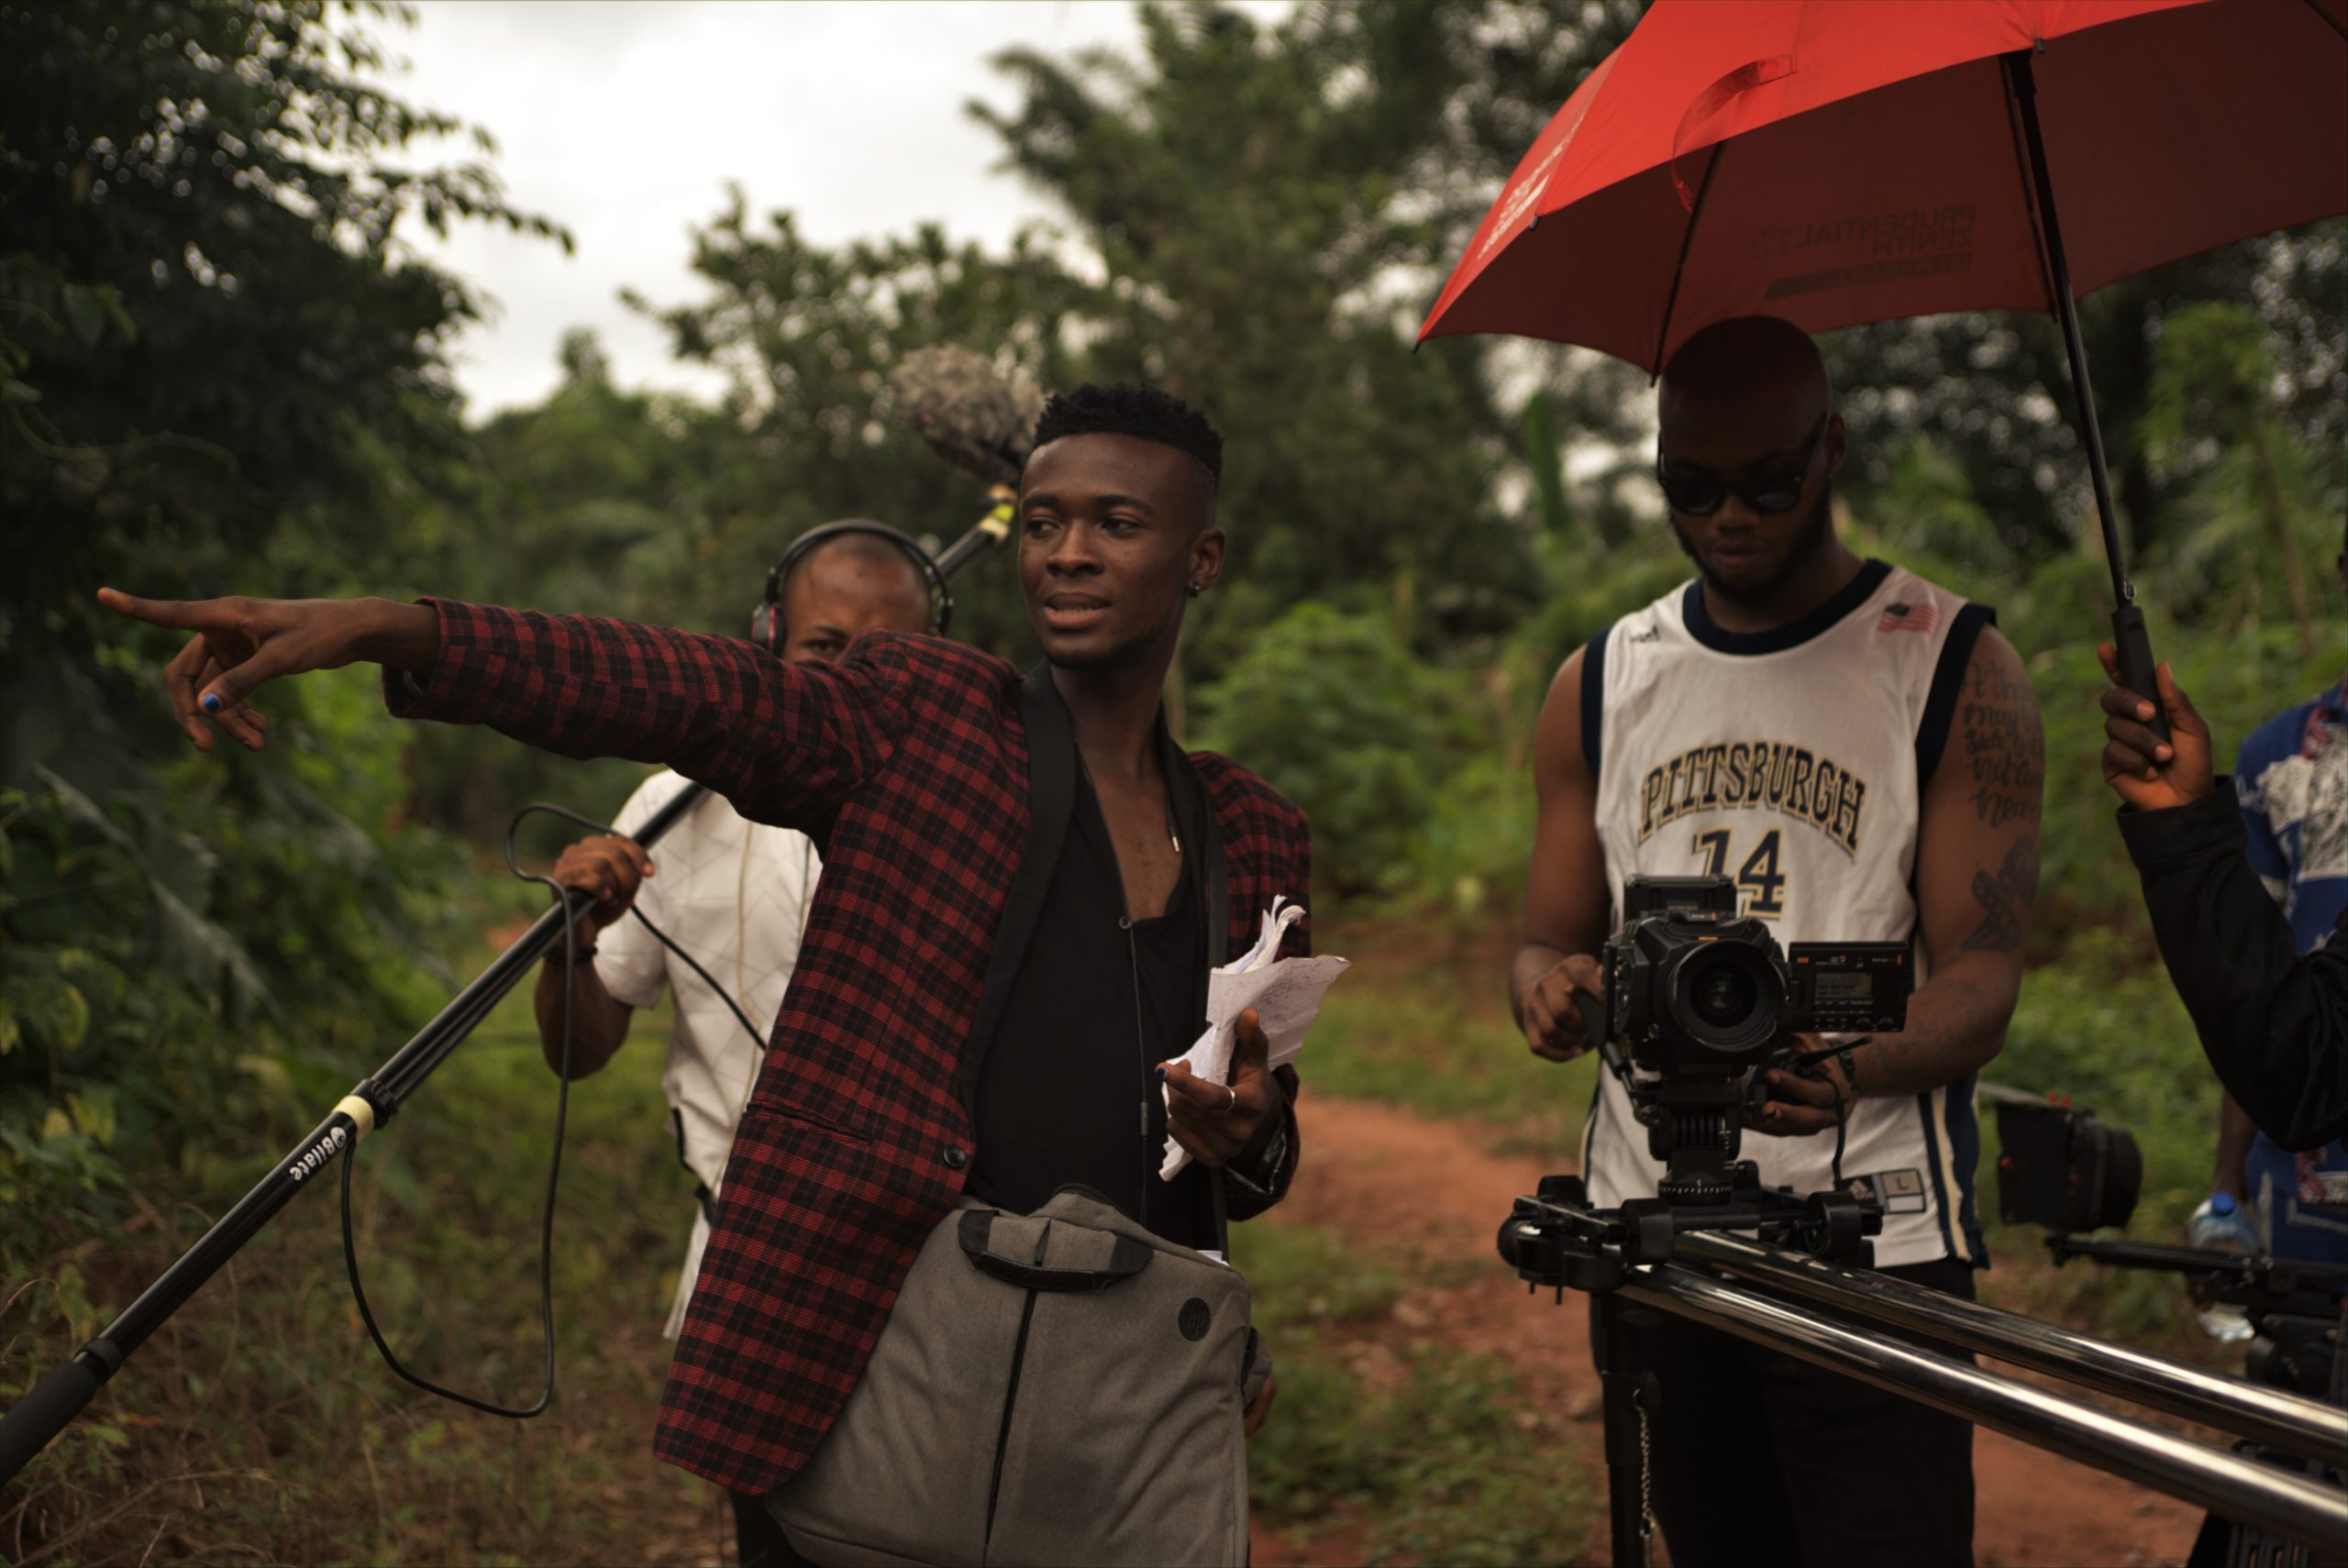 Image description: Wapah Ezeigwe on set of Country Love. The image shows Wapah Ezeigwe directing a scene from Country Love. They are dressed in a black shirt and a red and black striped jacket with a grey bag hanging across their shoulders. They are pointing at something with one hand and holding a bunch of papers in another. Standing by them are three persons. One of them dressed in a white basketball vest is holding a camera and the other dressed in a white T-shirt too is holding a boom microphone. There is a visible hand holding up a red umbrella for the rest. 